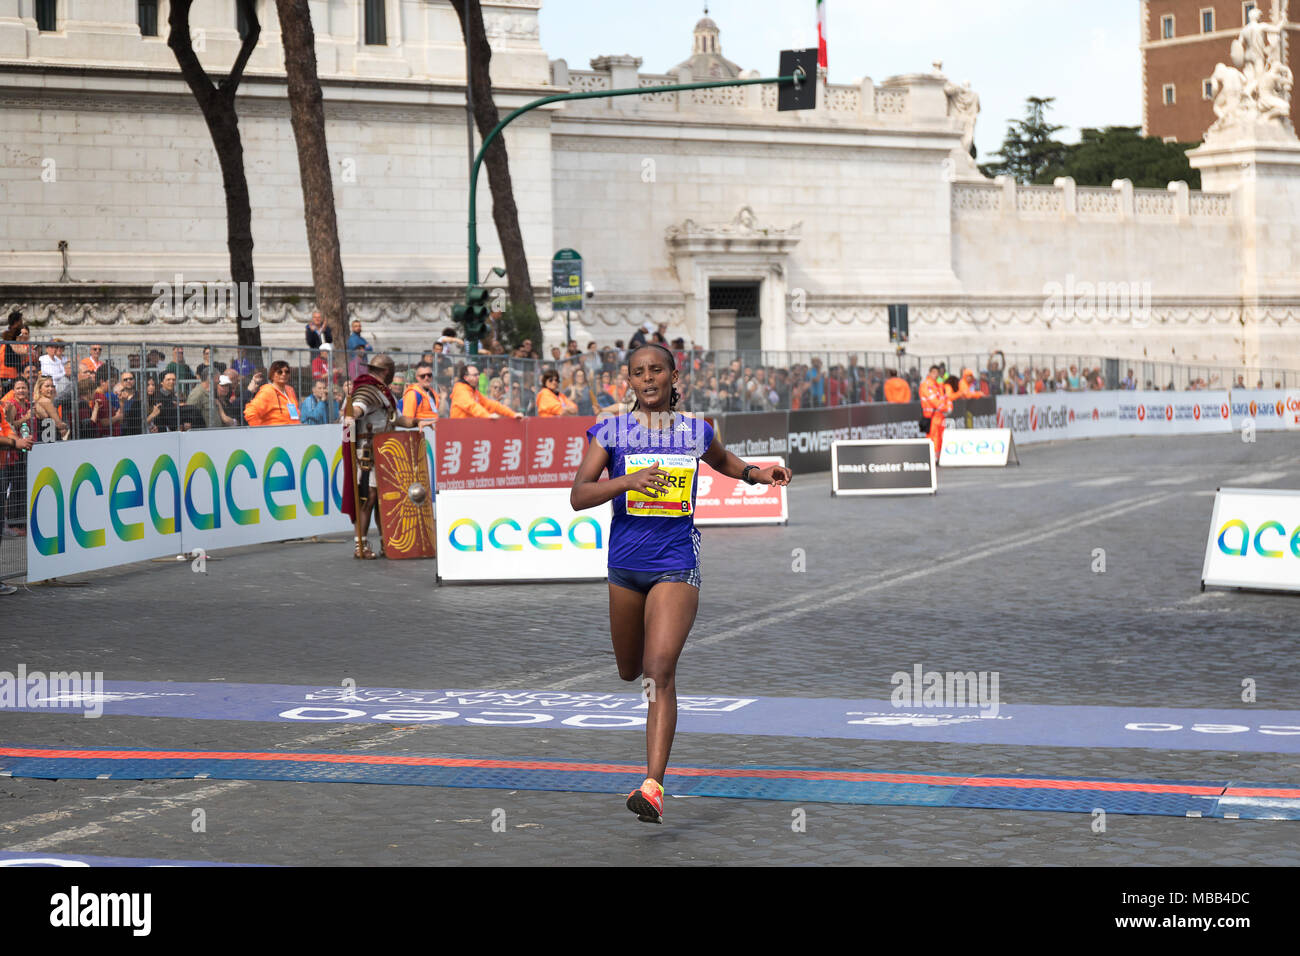 Rome, Italy - 8 April 2018: Athlete participating in the 24th edition of the Rome Marathon and Run for Fun reaches the finish line. Credit: Polifoto/Alamy Live News Stock Photo